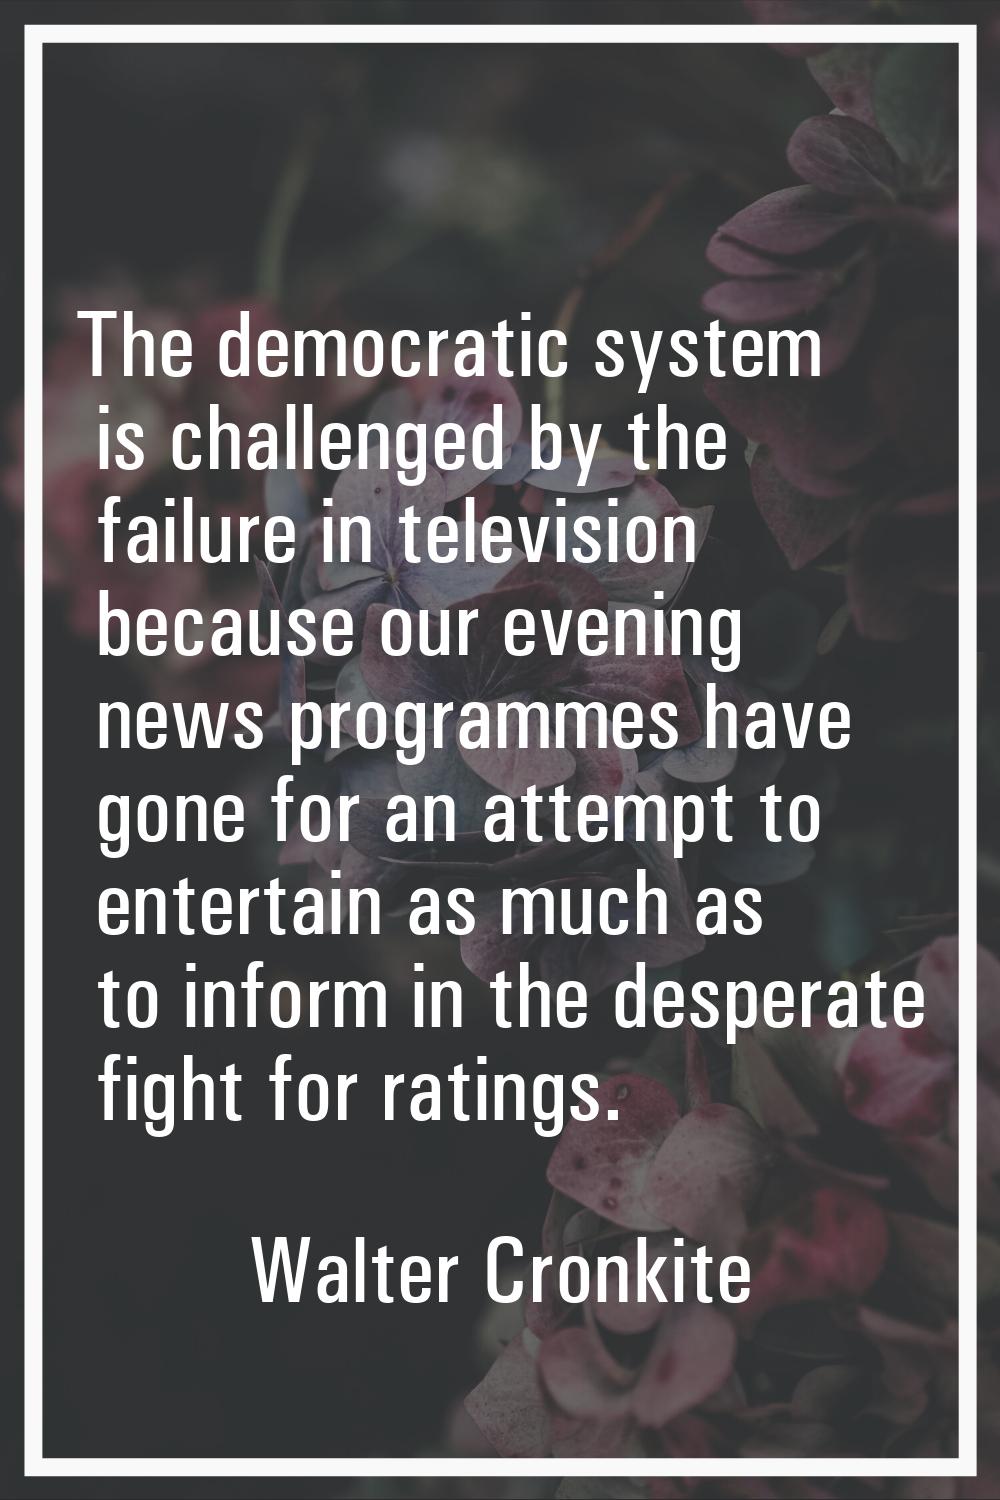 The democratic system is challenged by the failure in television because our evening news programme